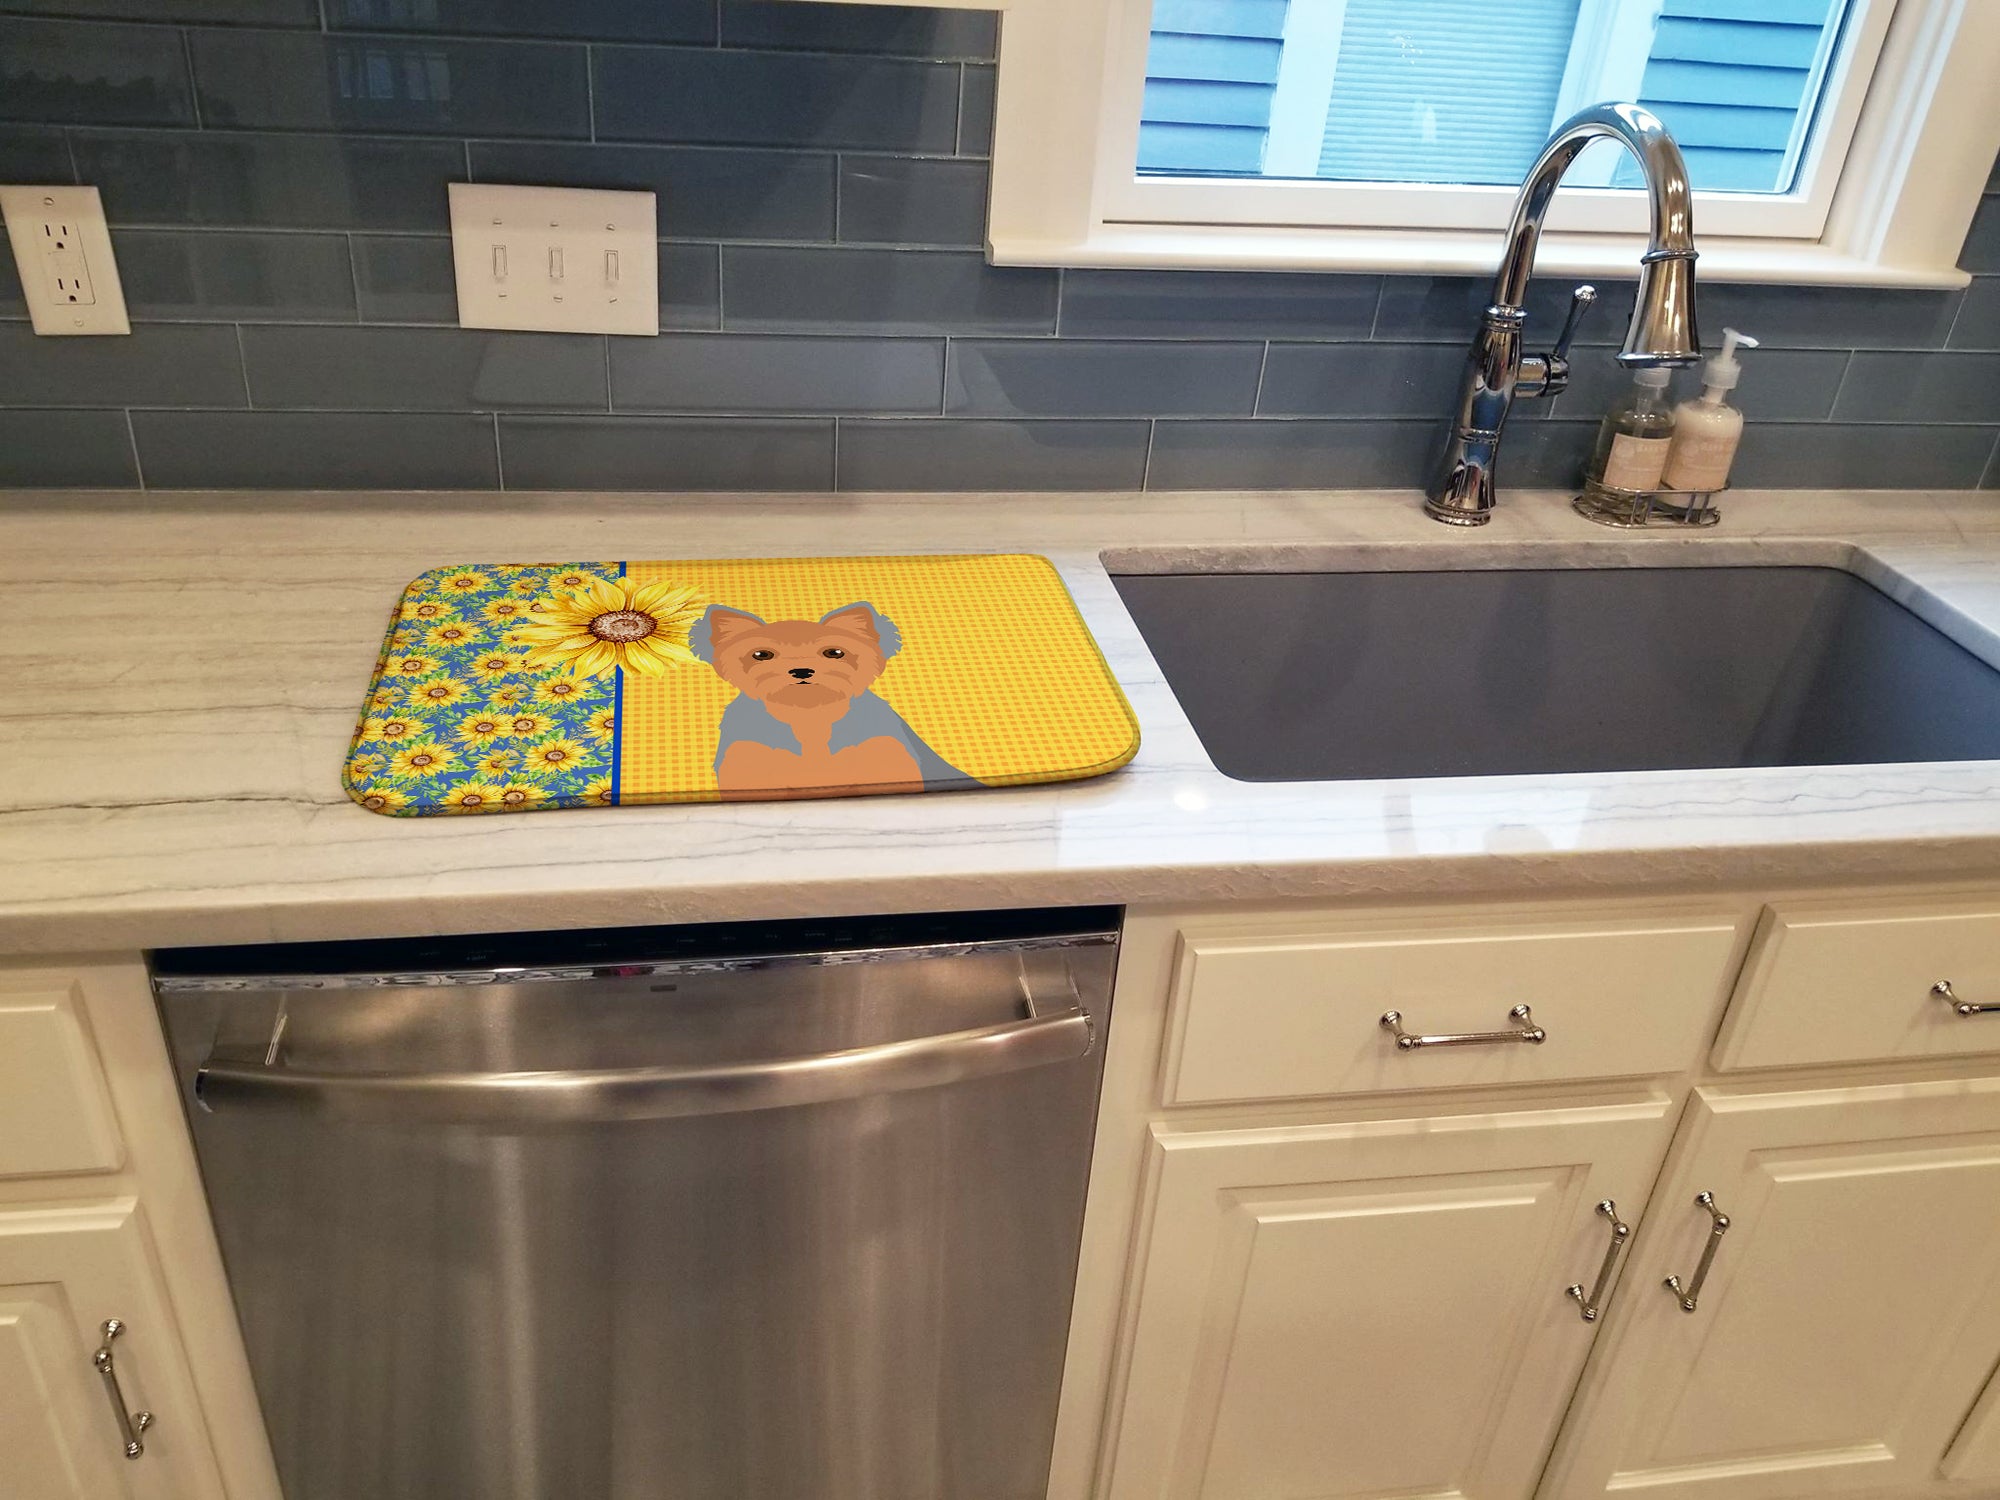 Summer Sunflowers Blue and Tan Puppy Cut Yorkshire Terrier Dish Drying Mat  the-store.com.